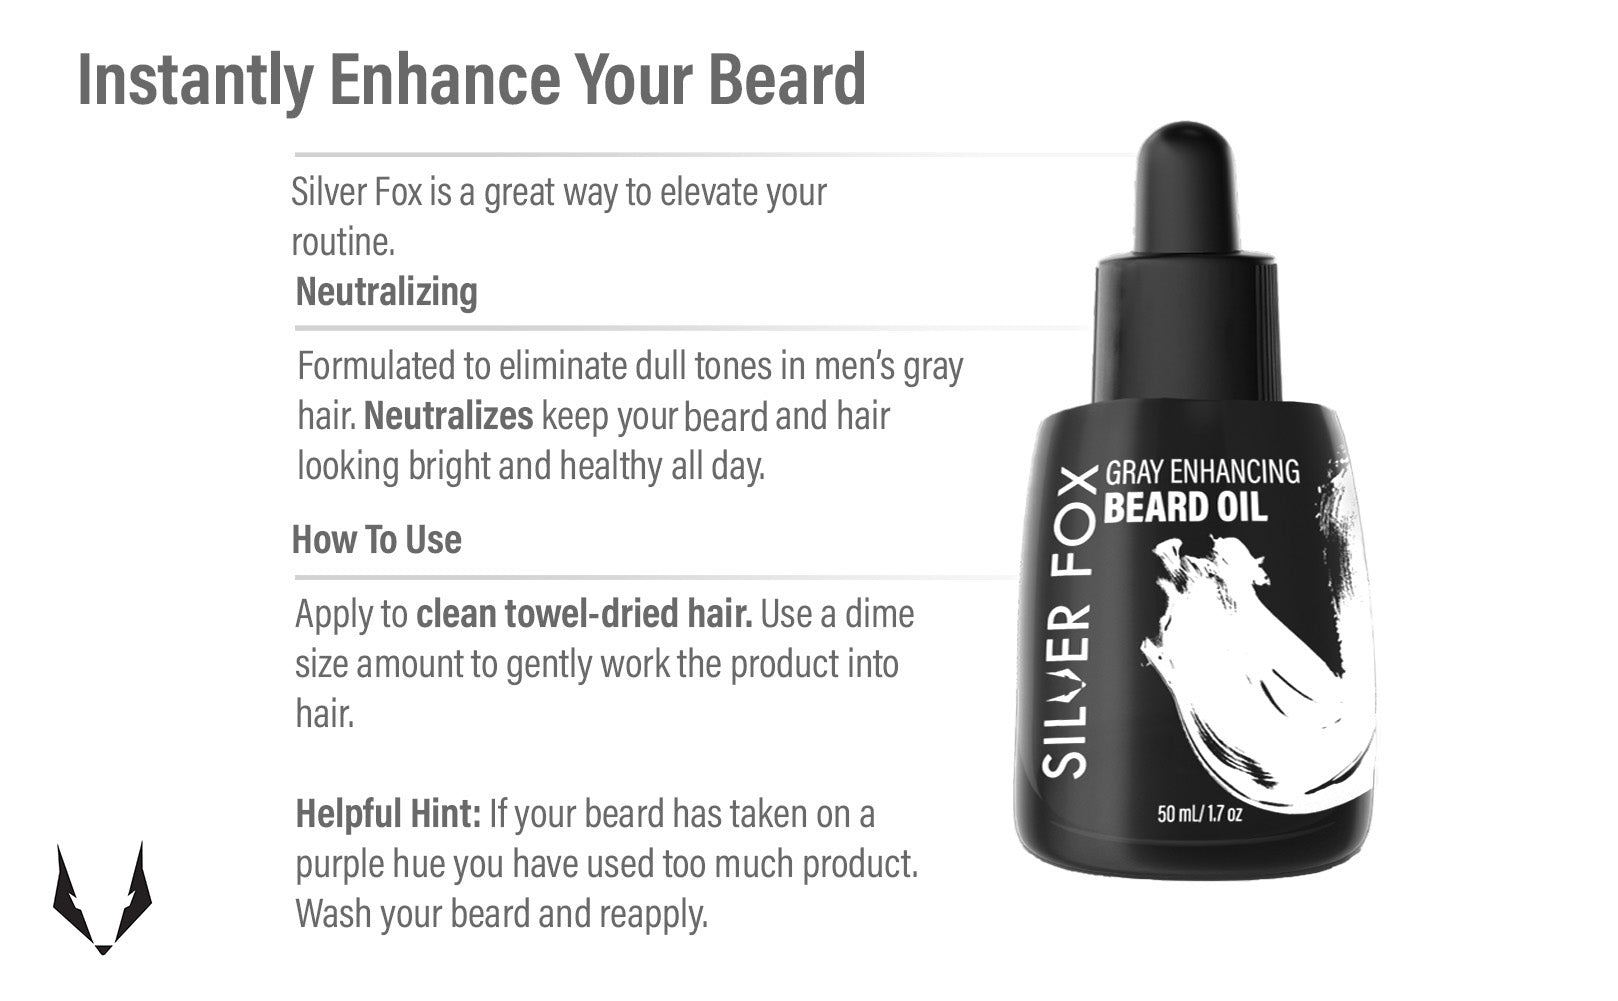 Silver Fox beard oil functions and instructions